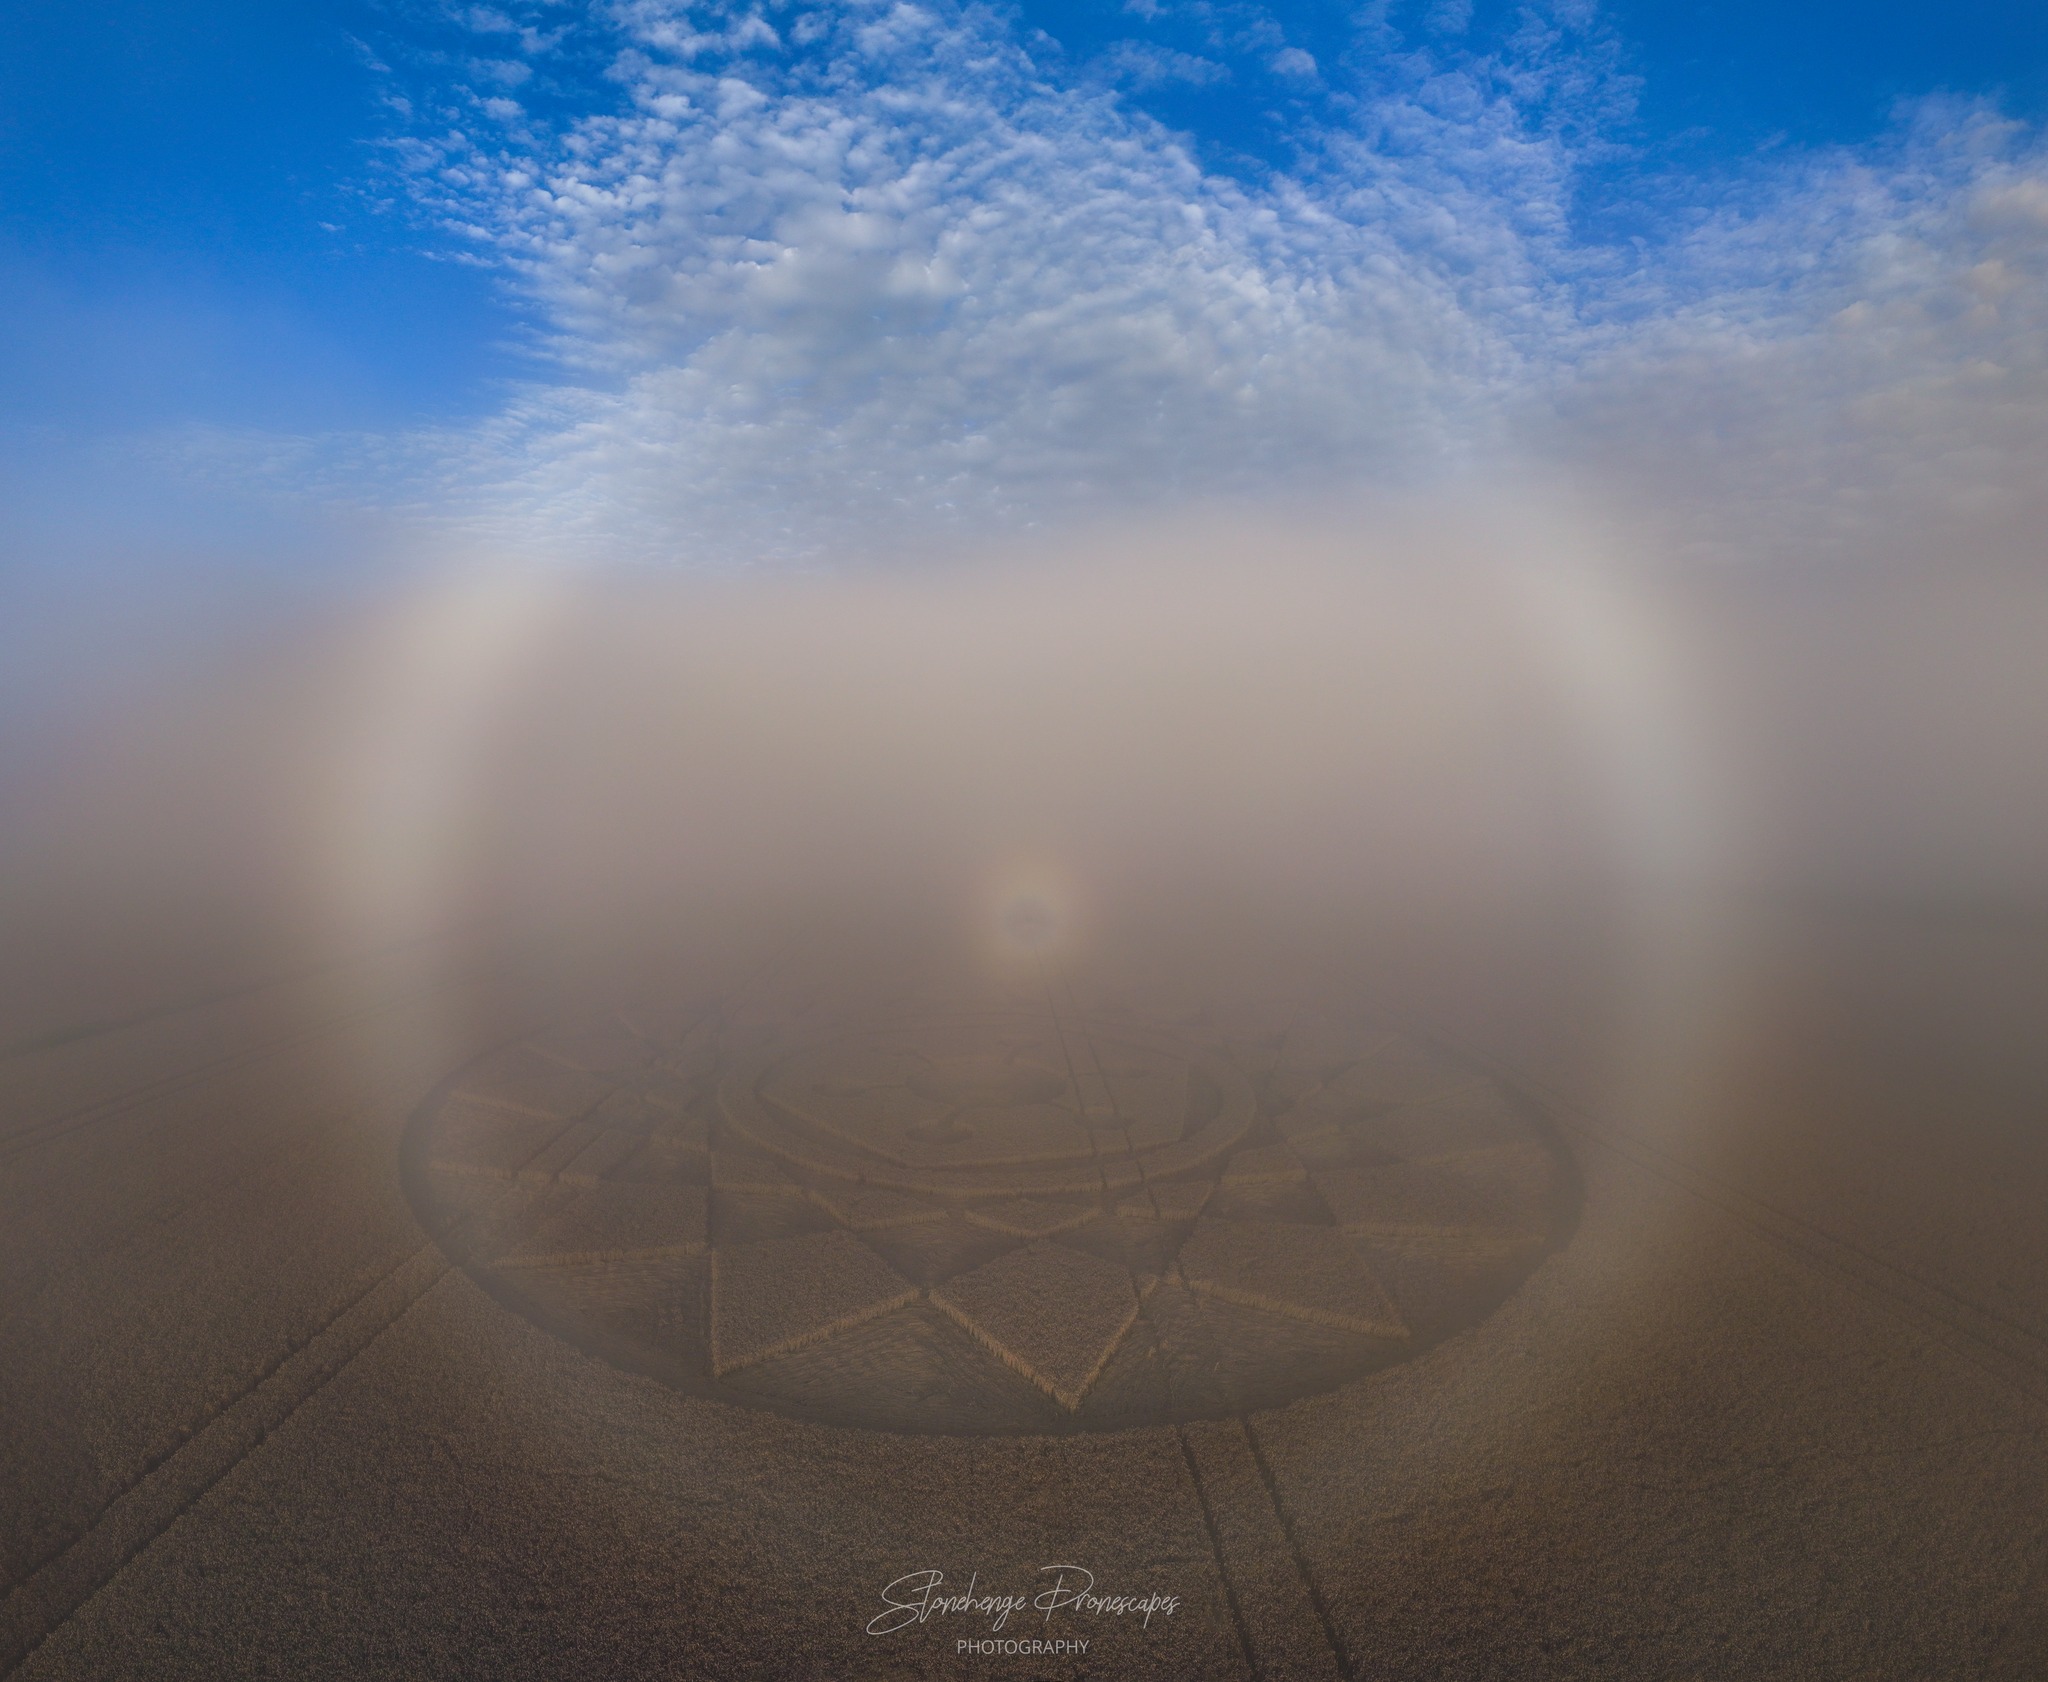 A full radial Fogbow over the Roundway Hill crop circle yesterday